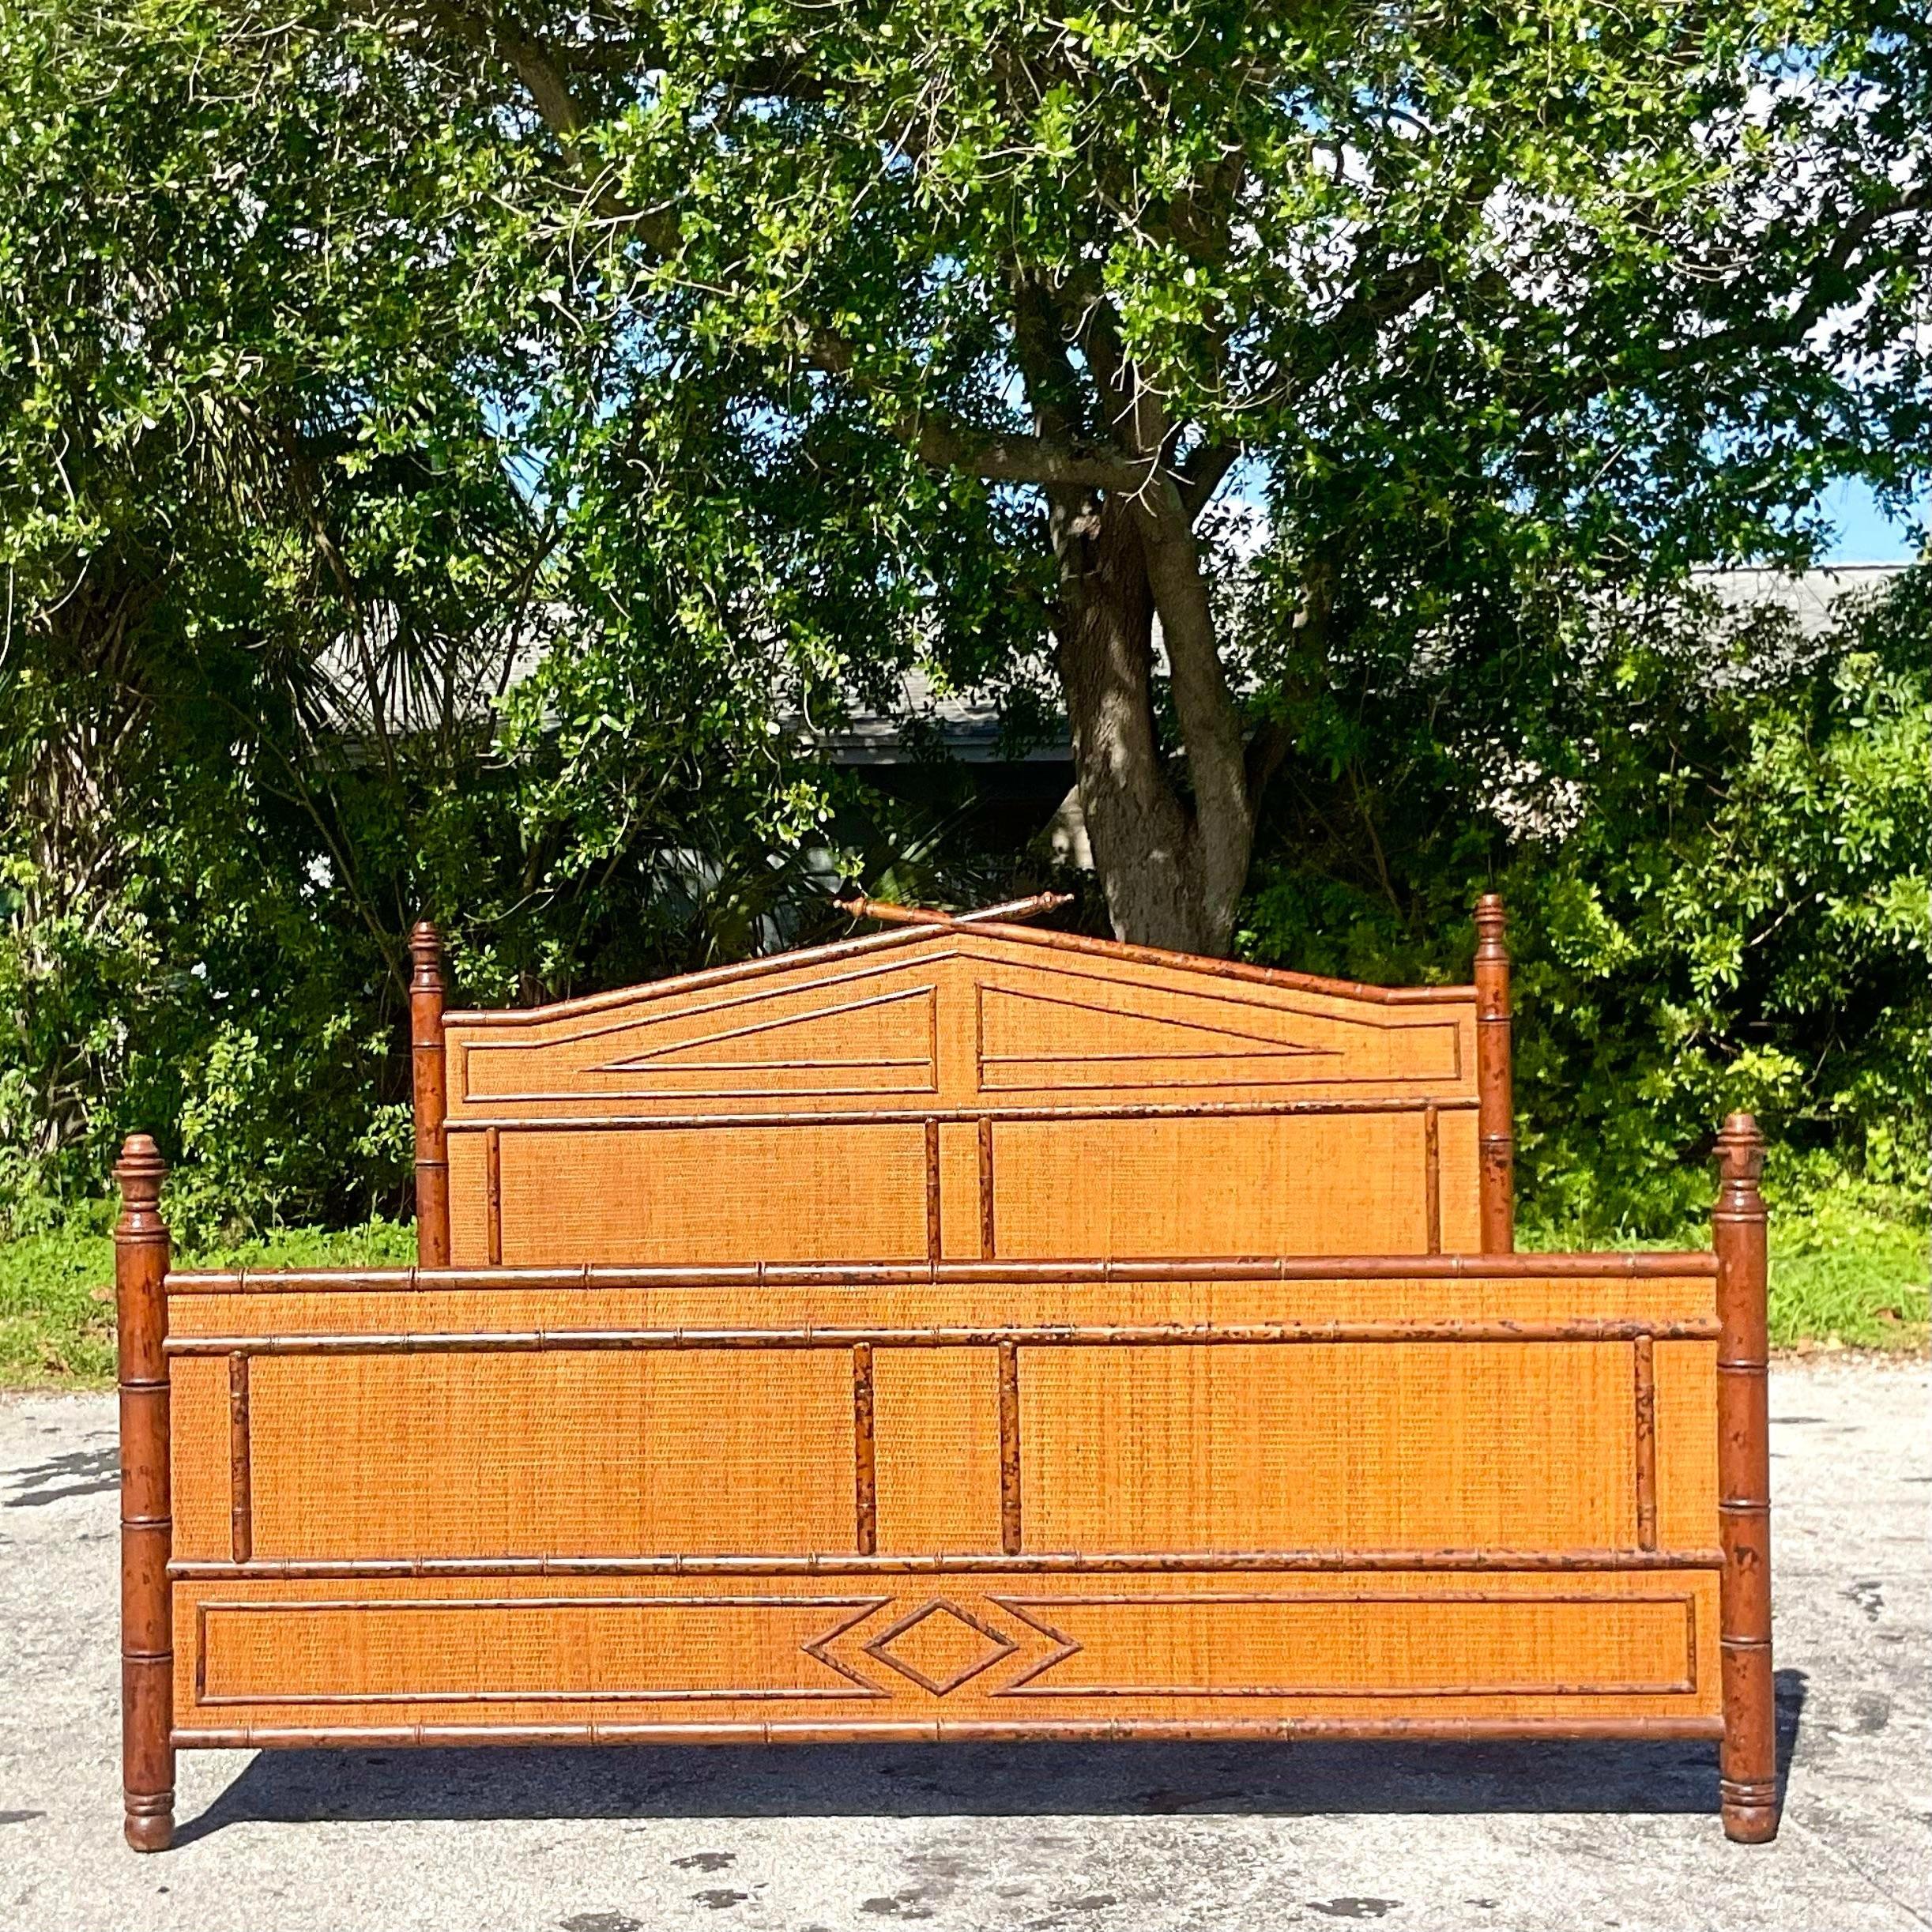 A fabulous vintage Coastal King size bed frame. A chic burnt bamboo bed frame with insert woven rattan panels. The coveted diamond design in rich warm browns. Coordinating pieces also available on my page. Acquired from a Palm Beach estate